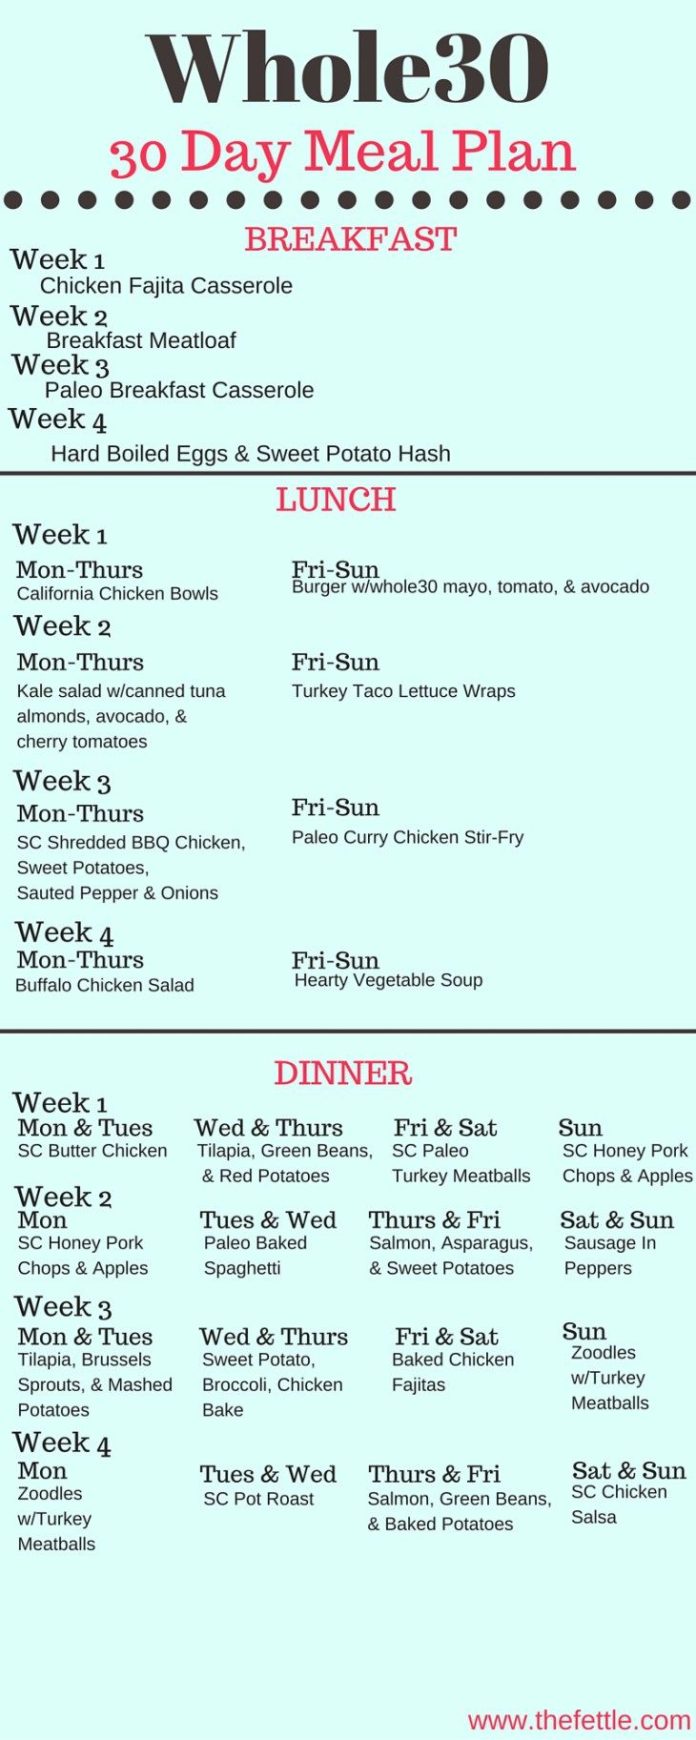 diet-plan-to-lose-weight-the-whole30-meal-plan-30-days-of-meals-the